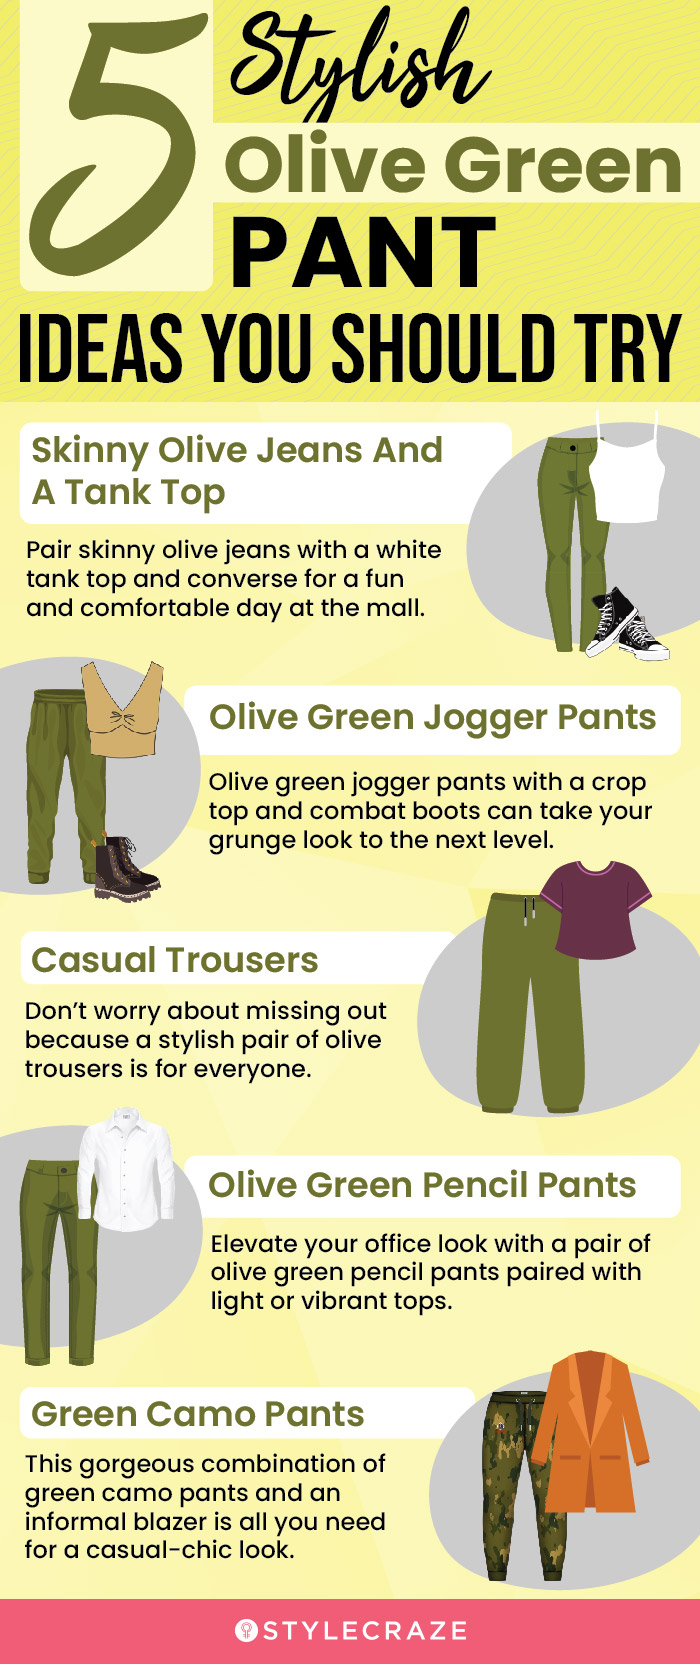 5 stylish olive green pant ideas you should try (infographic)